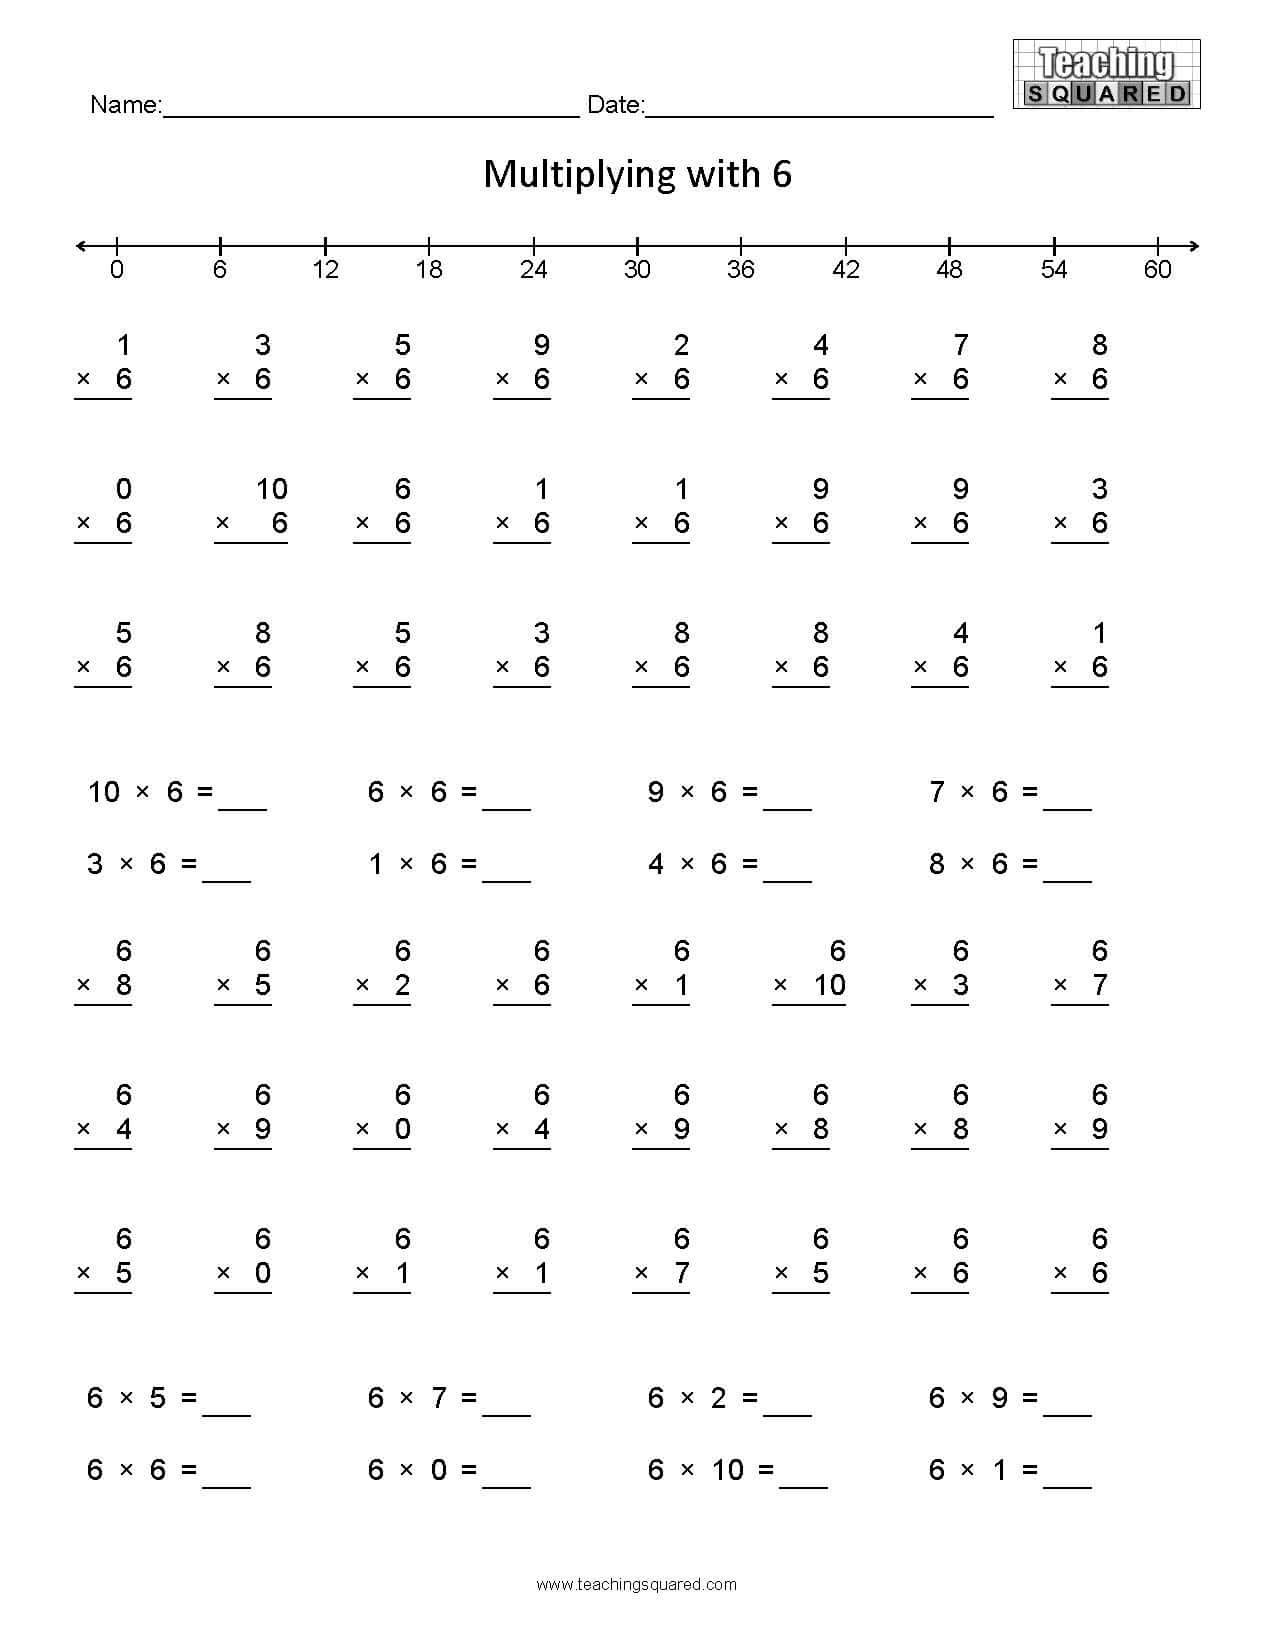 Multiplying by 6 Worksheet Learning Multiplication Multiplying by 6 Teaching Squared